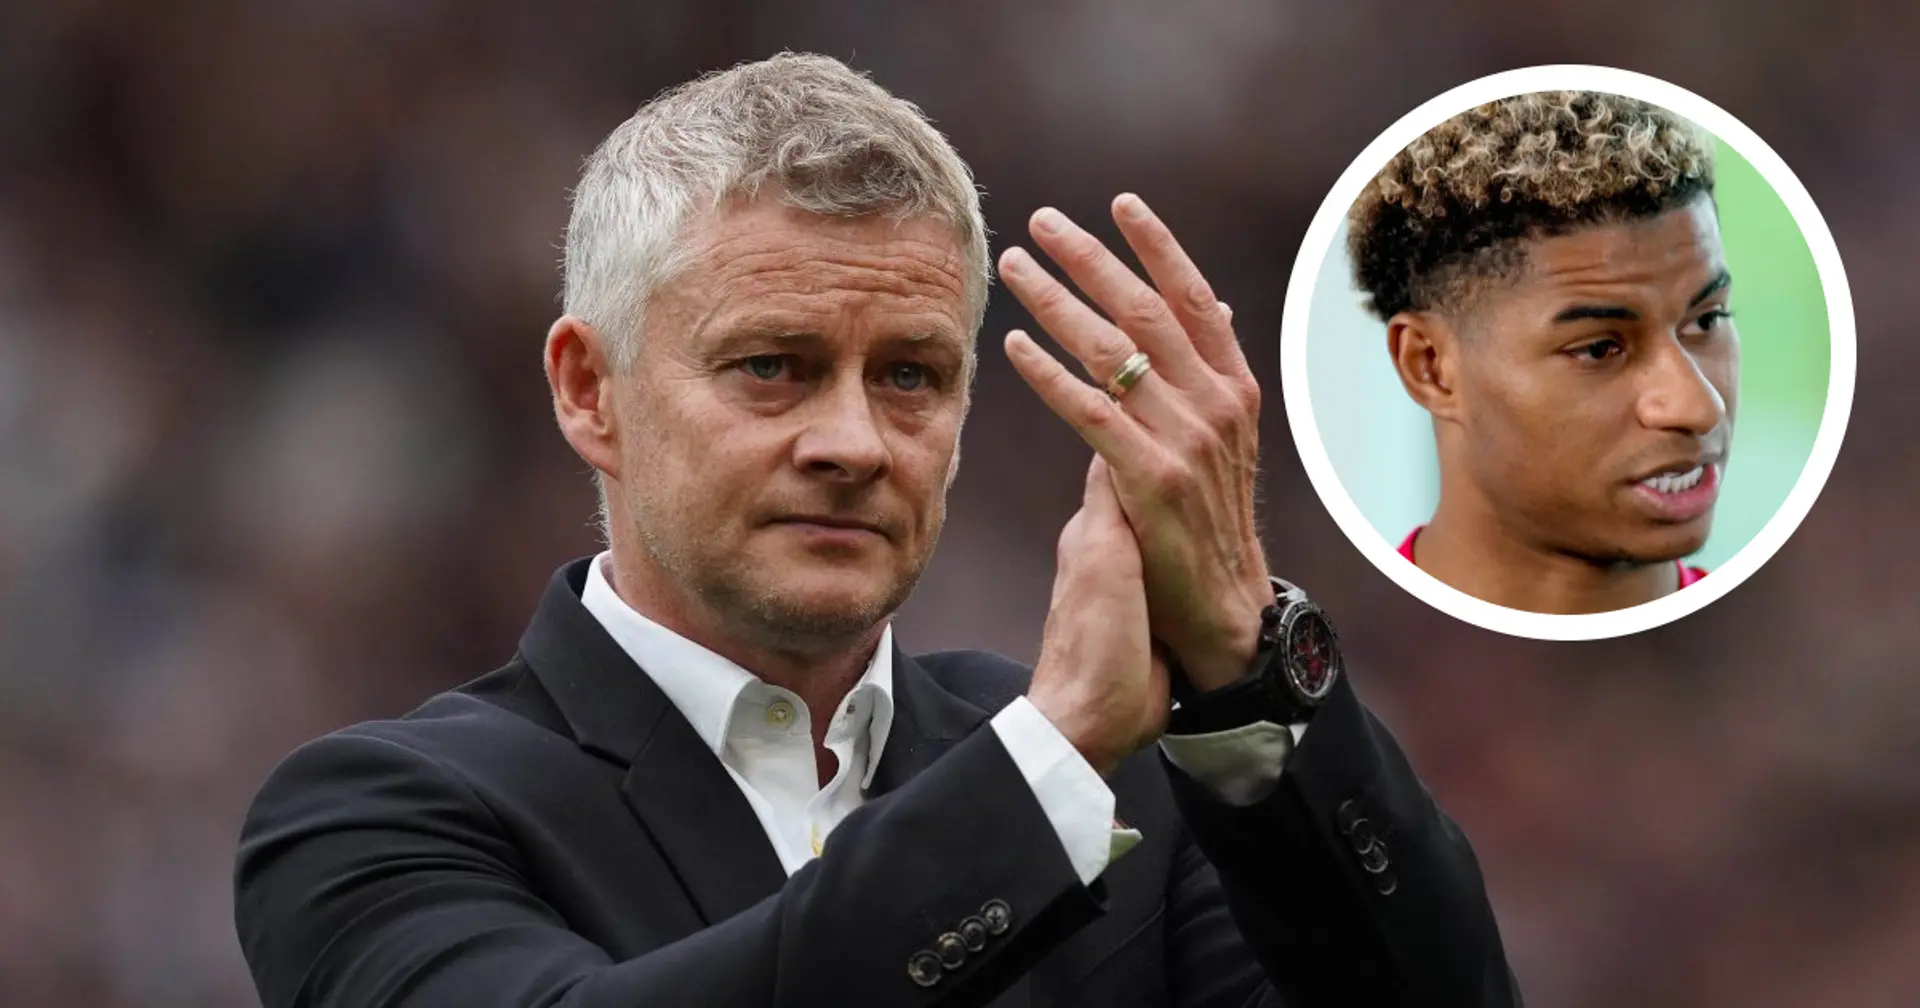 'We always seemed to fall short': Rashford insists he feels 'guilty' about Solskjaer sacking